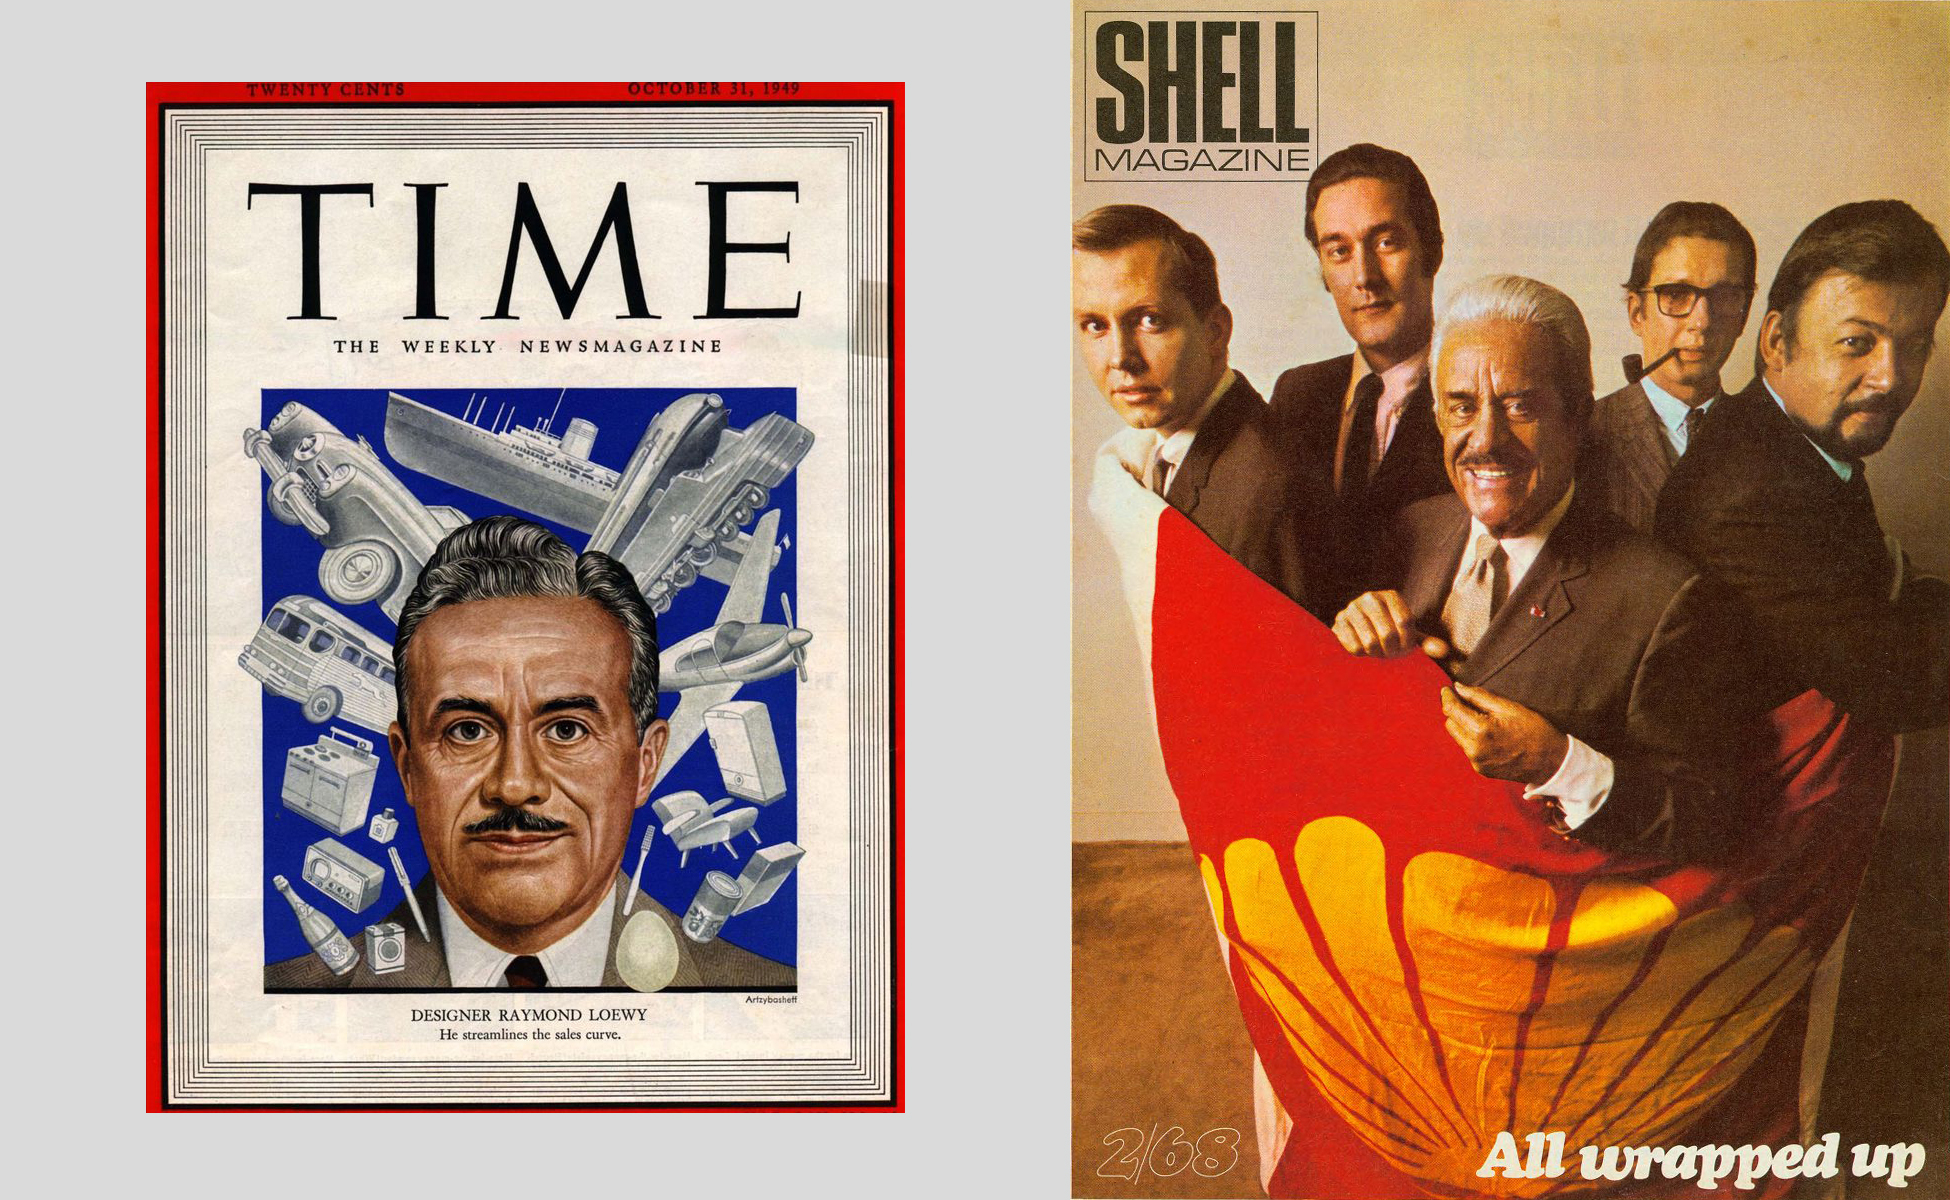 time-shell-magazines-loewy